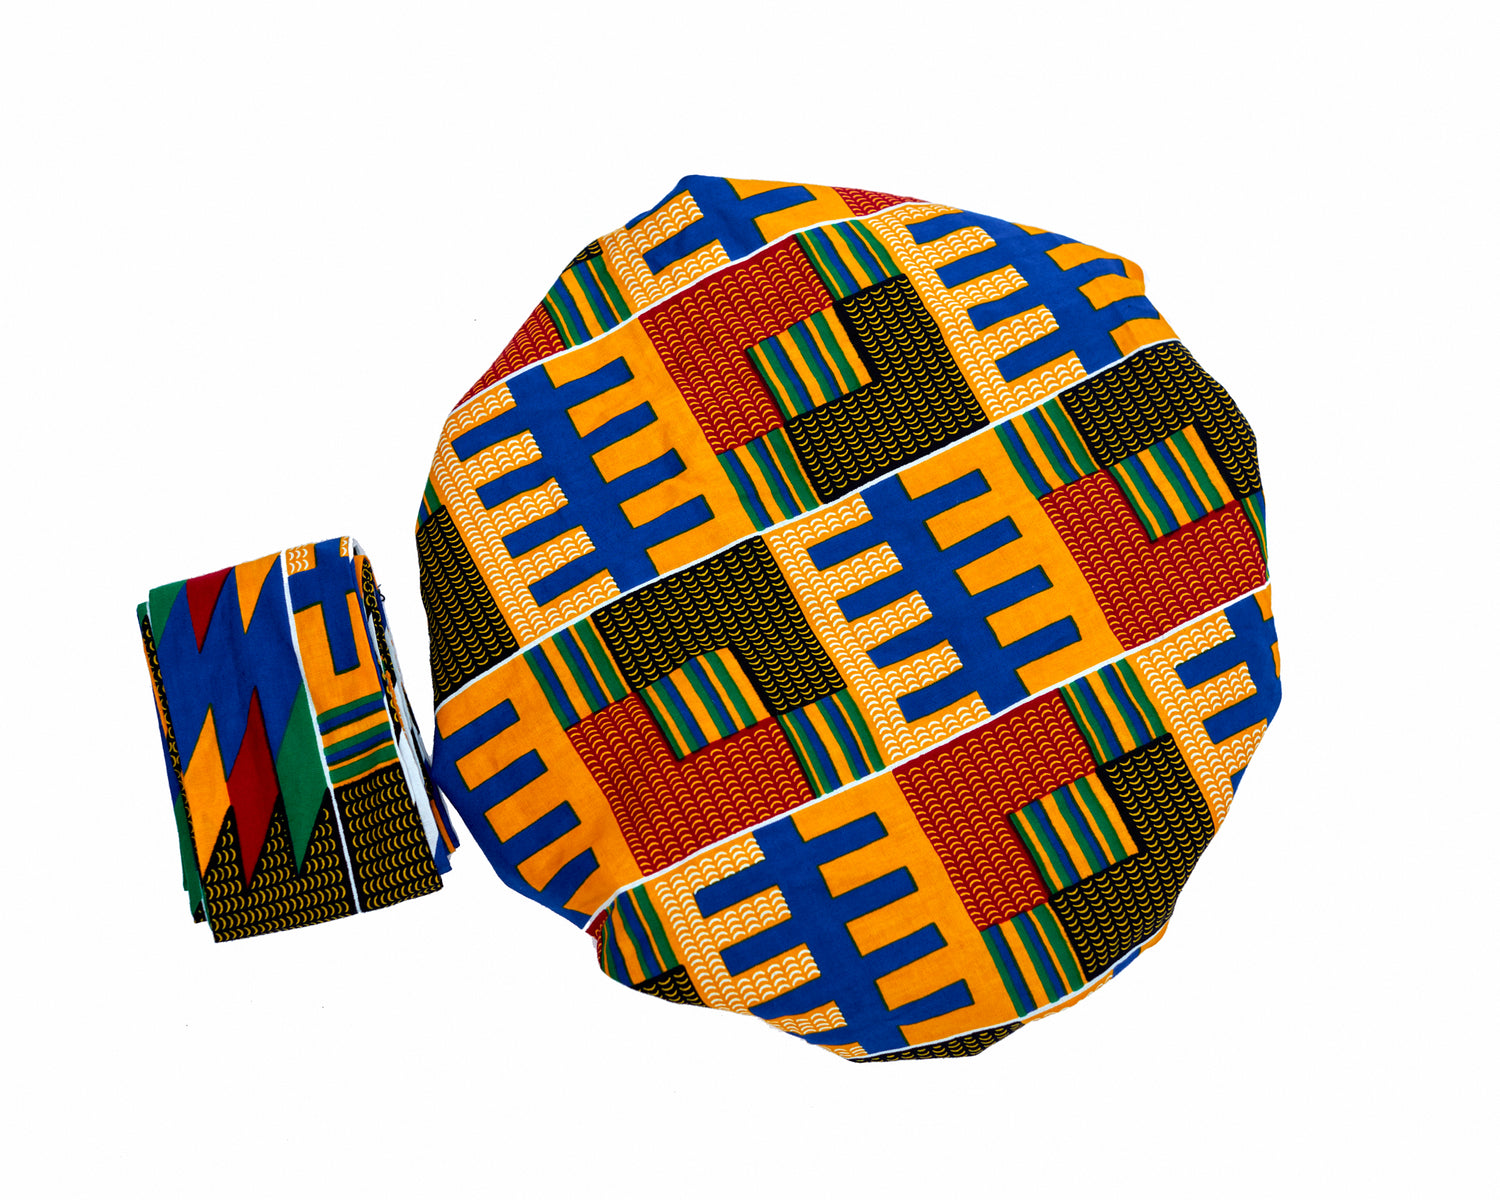 Ghanaian Kente Wax Print Made of Yellow, Red, Green, Black,Blue Blend of Beautiful Colours And Pattern With Adinkira Symbols, Hand Made Elastic Silklined Bonnet With Band